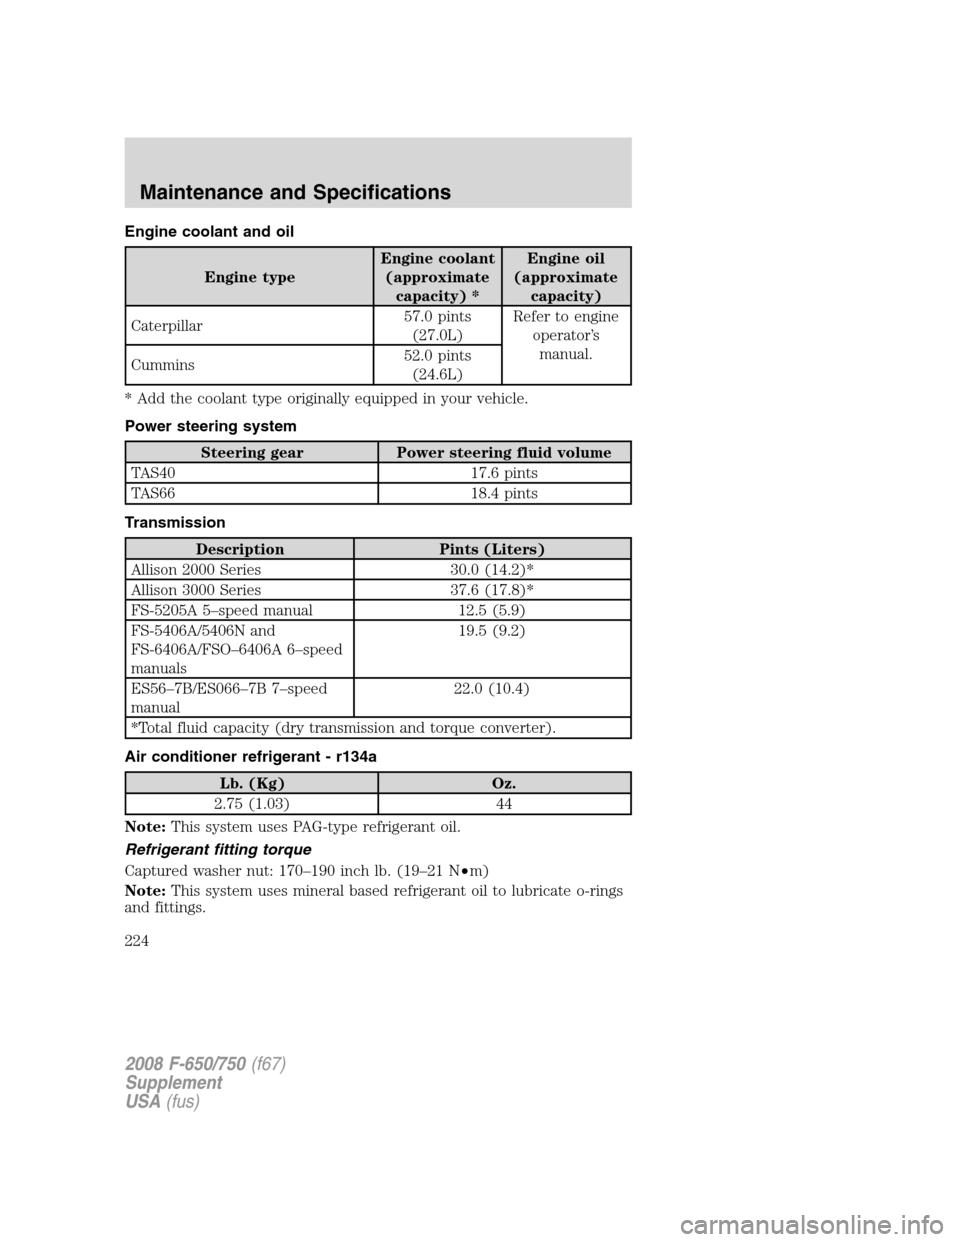 FORD F750 2008 11.G Owners Manual Engine coolant and oil
Engine typeEngine coolant
(approximate
capacity) *Engine oil
(approximate
capacity)
Caterpillar57.0 pints
(27.0L)Refer to engine
operator’s
manual.
Cummins52.0 pints
(24.6L)
*